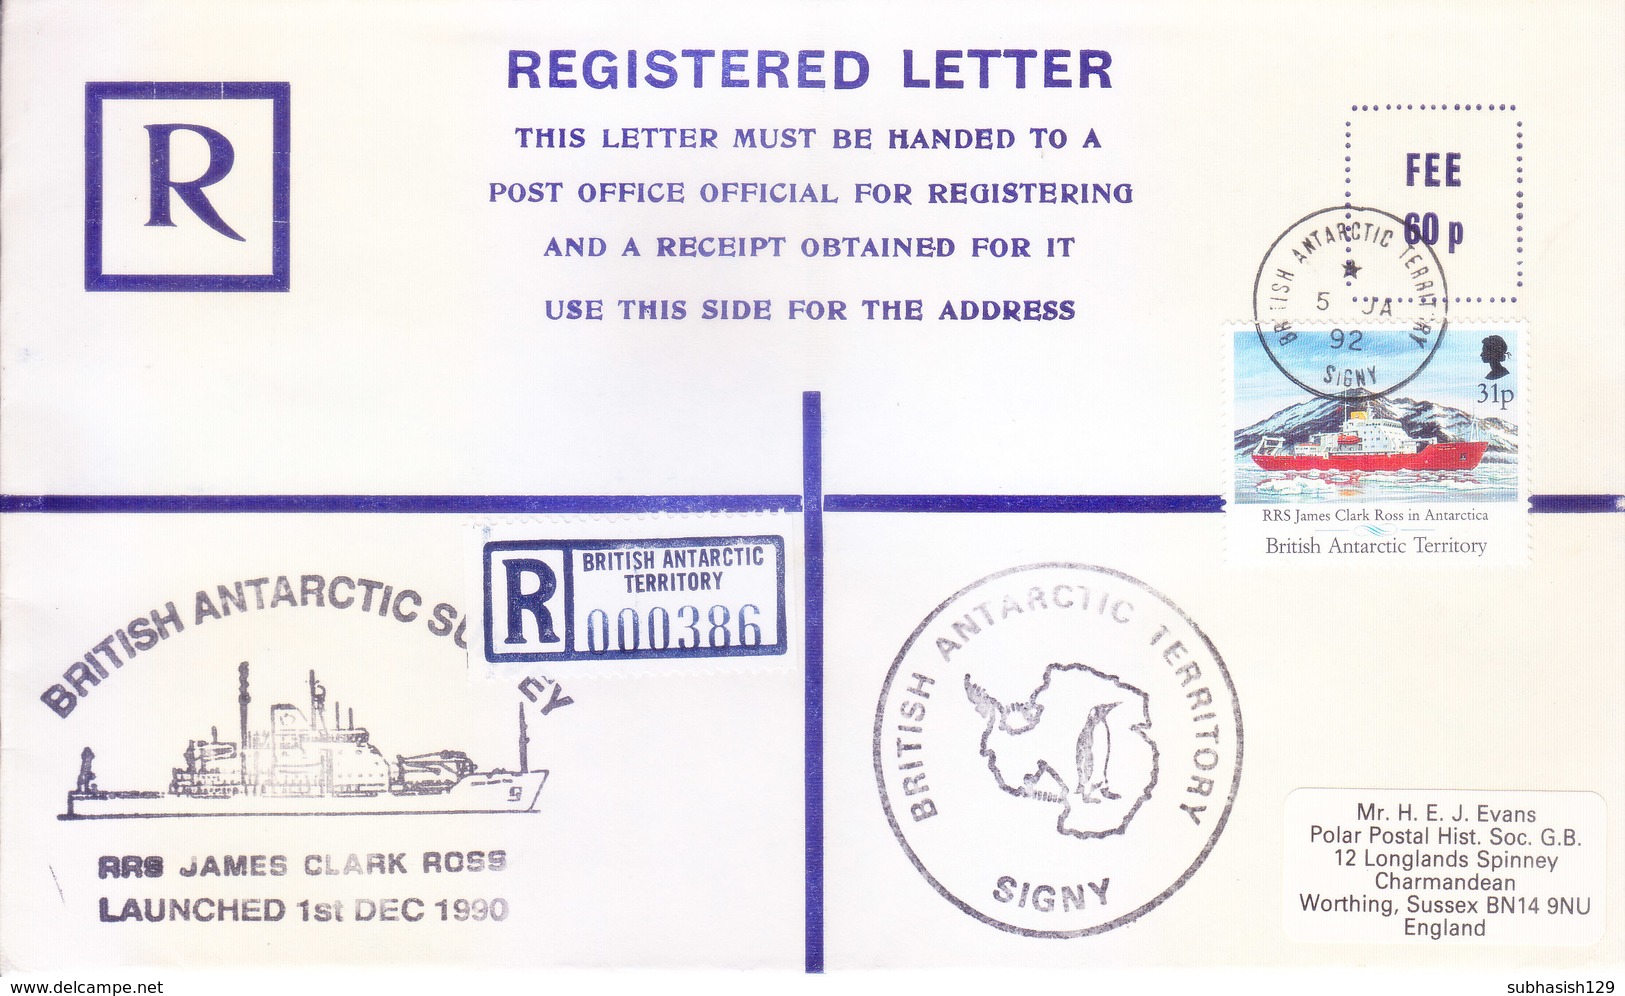 BRITISH ANTARCTIC TERRITORY - EXPEDITION REGISTERED LETTER, 1992 - BRITISH ANTARCTIC SURVEY, BAMES CLARD ROSS - Covers & Documents